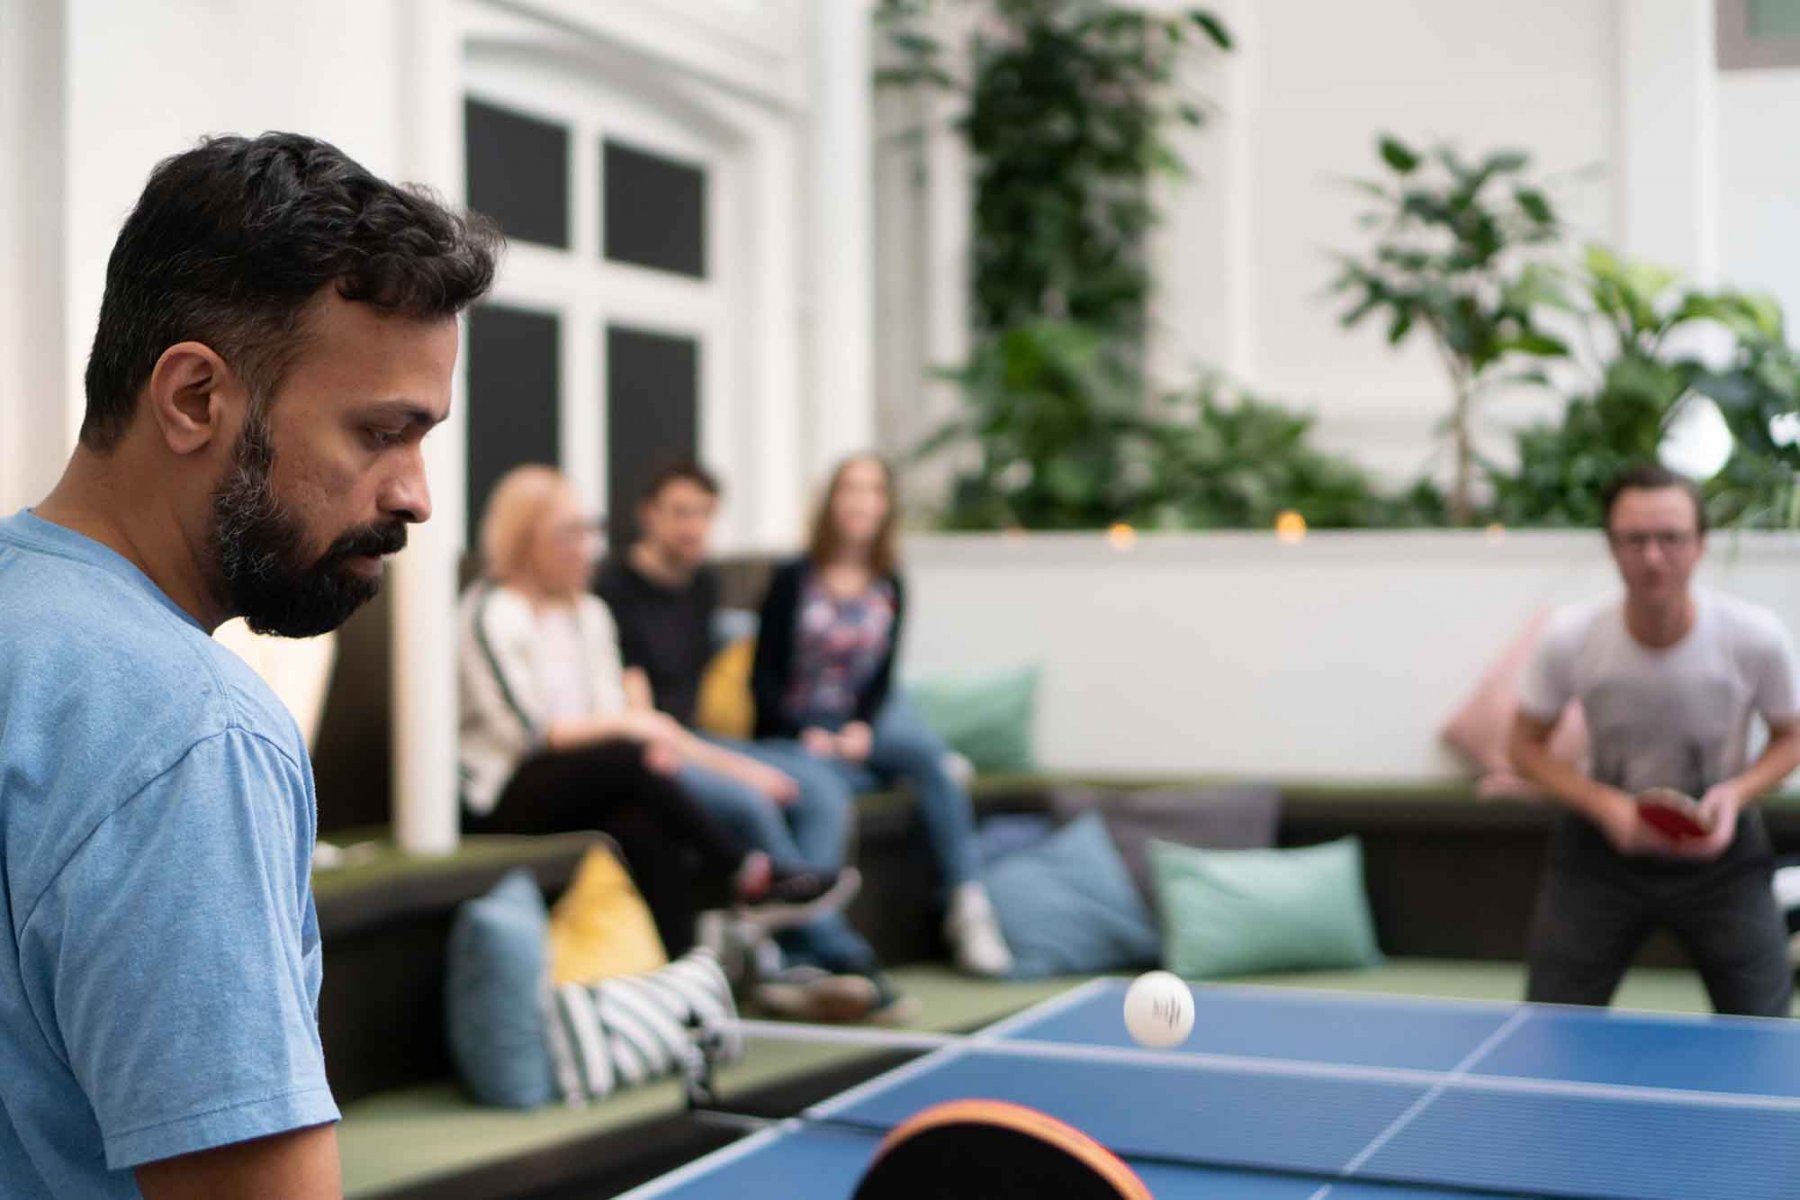 A man playing ping pong with colleagues